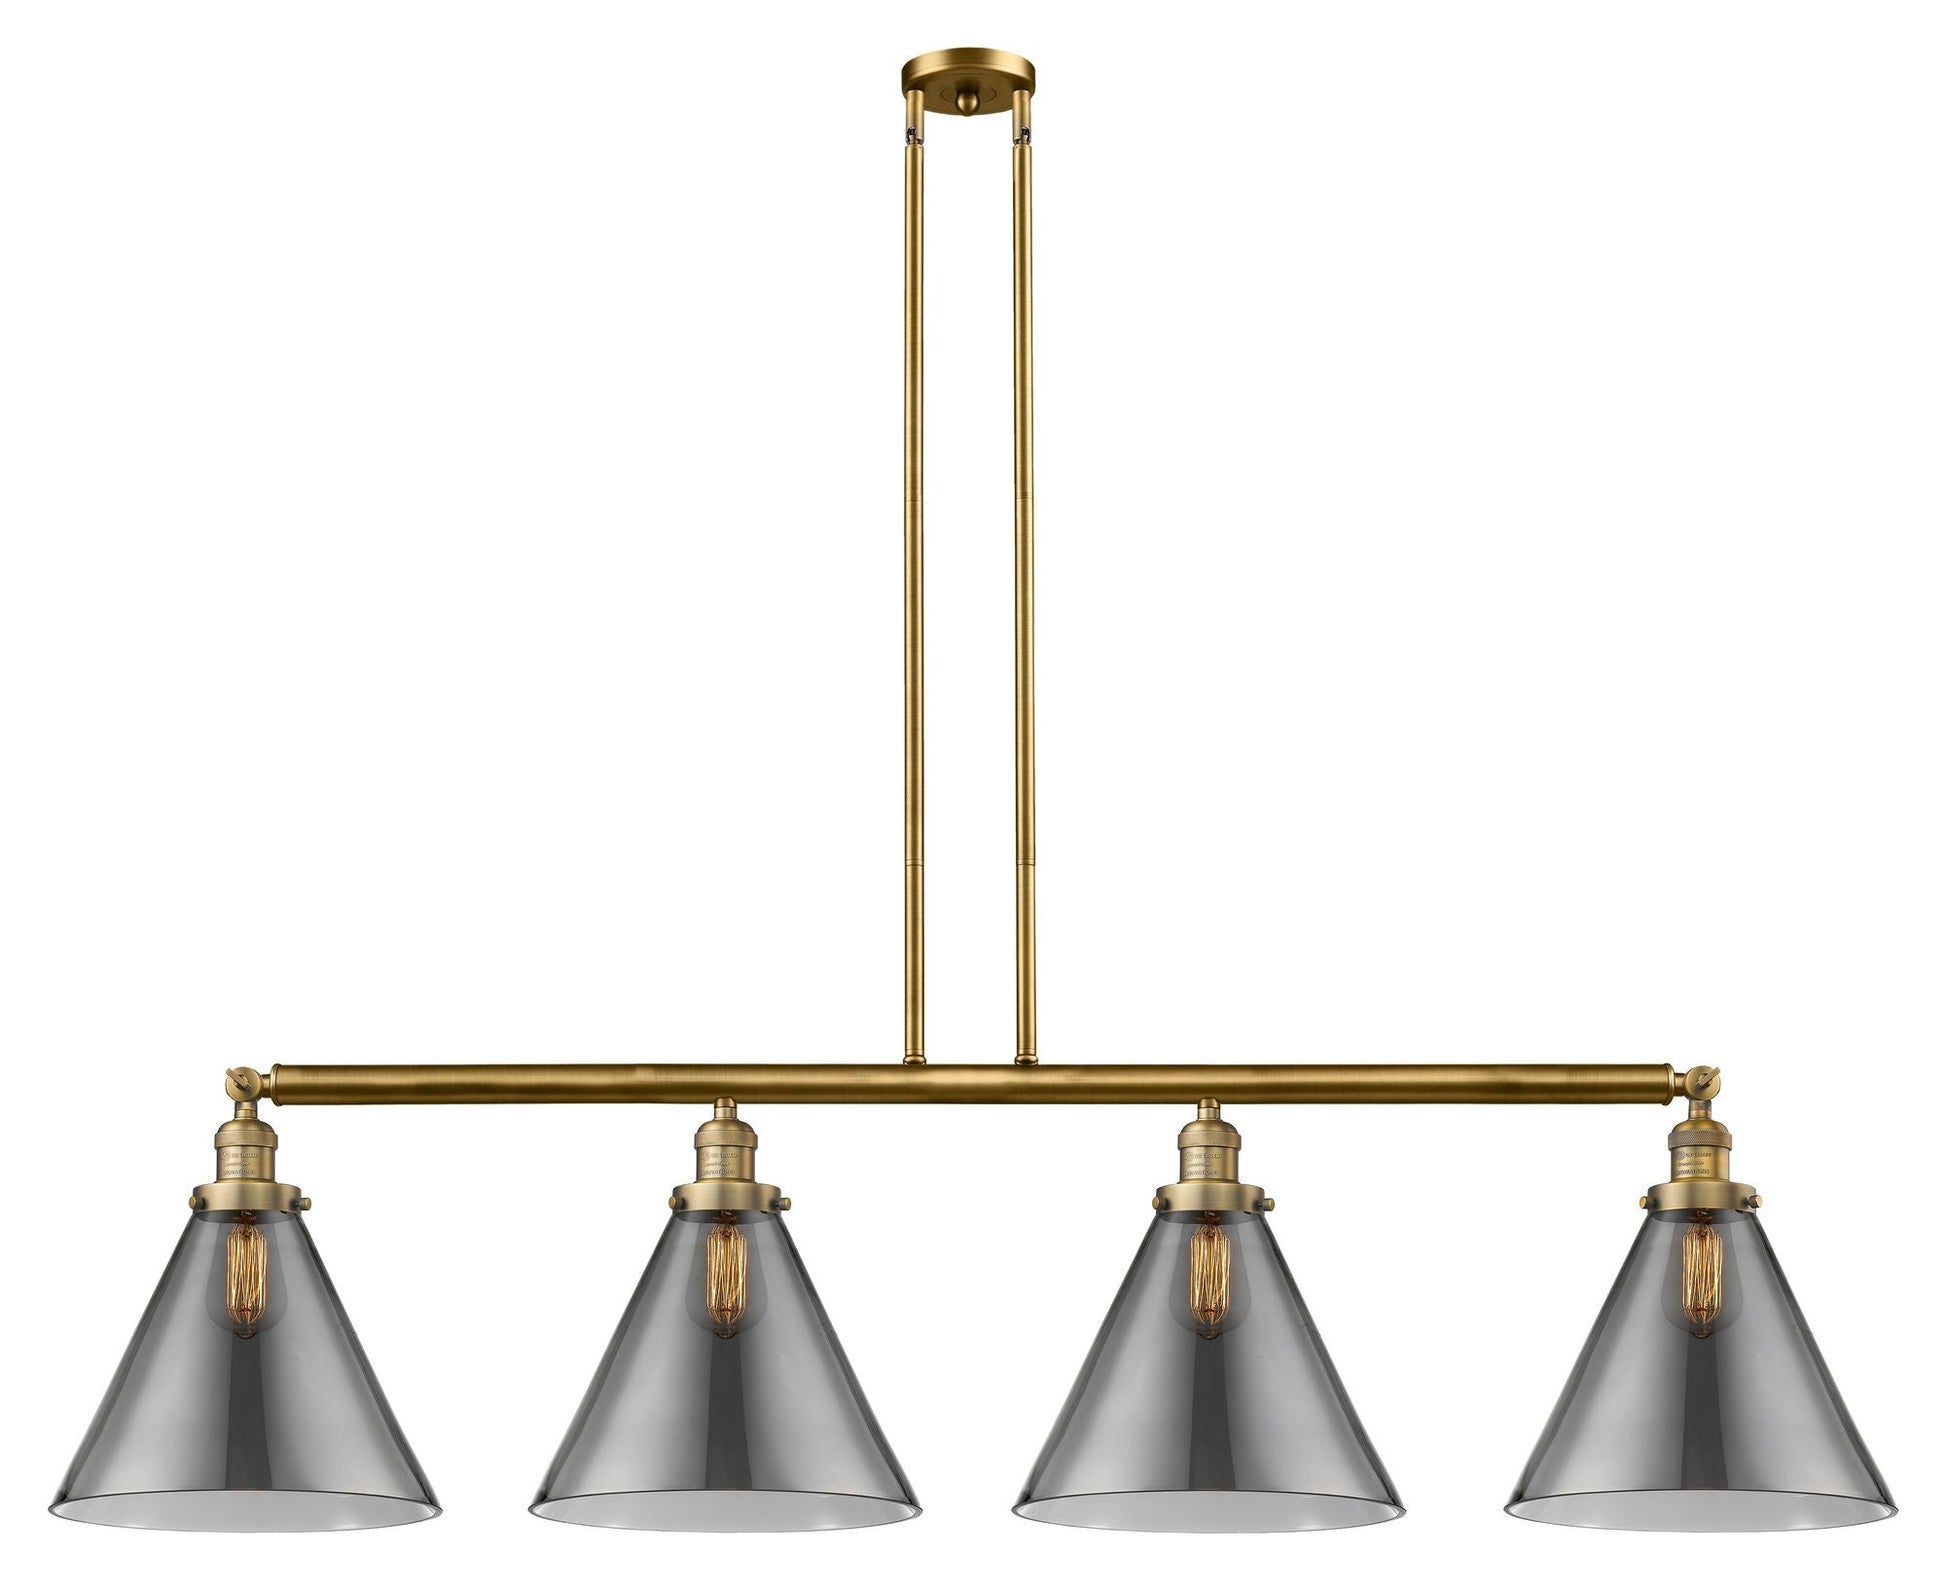 214-BB-G43-L 4-Light 56" Brushed Brass Island Light - Plated Smoke Cone 12" Glass - LED Bulb - Dimmensions: 56 x 12 x 14<br>Minimum Height : 24.25<br>Maximum Height : 48.25 - Sloped Ceiling Compatible: Yes